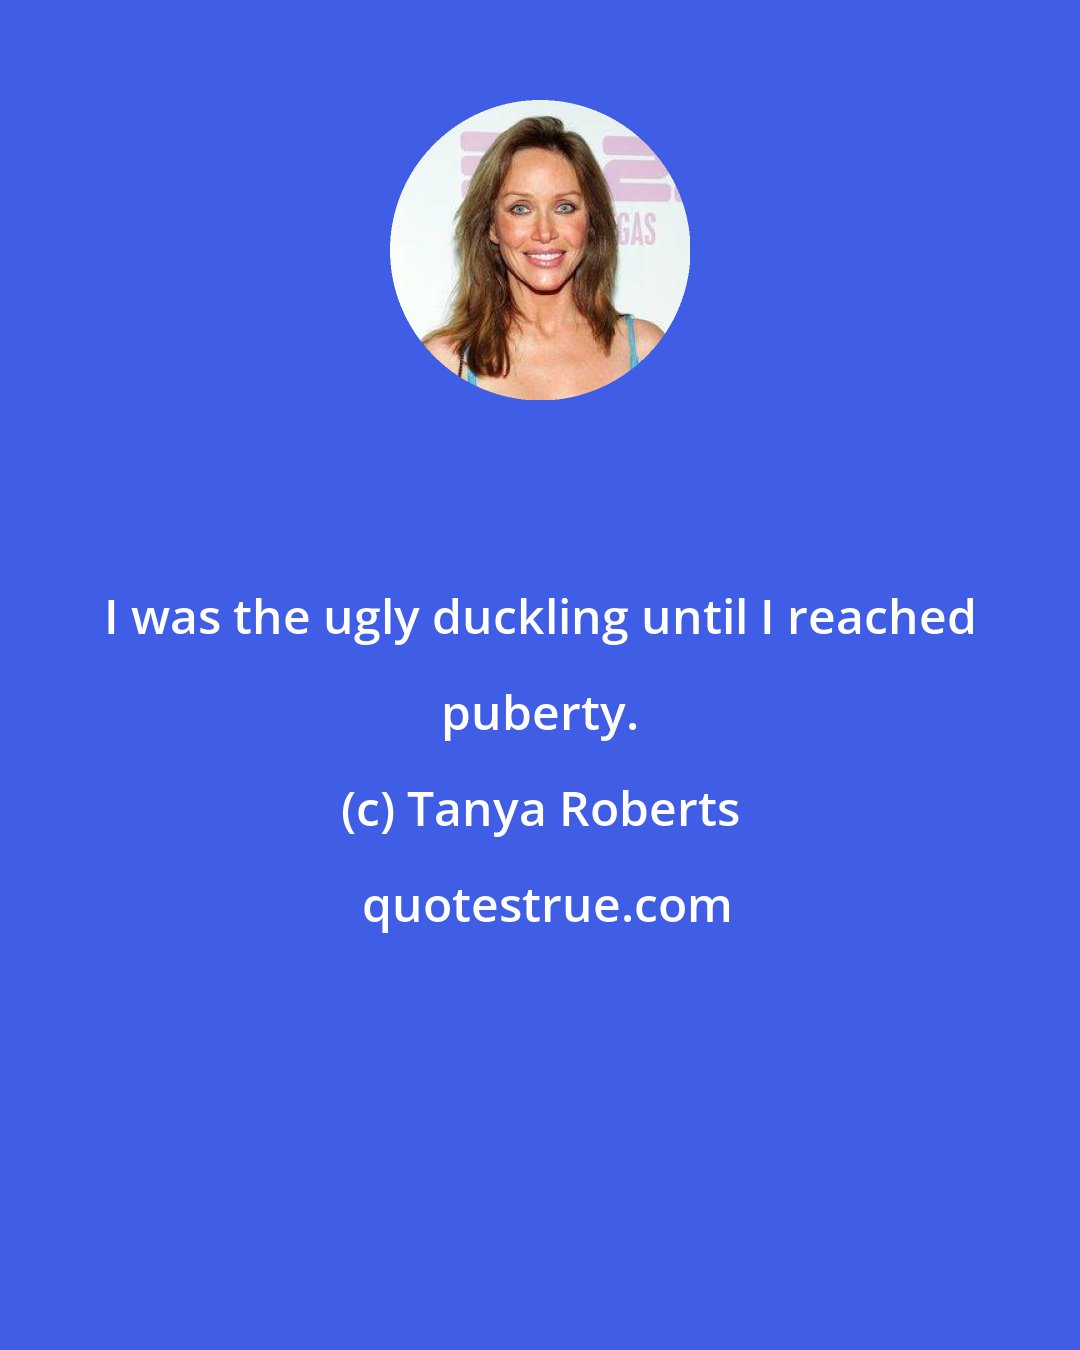 Tanya Roberts: I was the ugly duckling until I reached puberty.